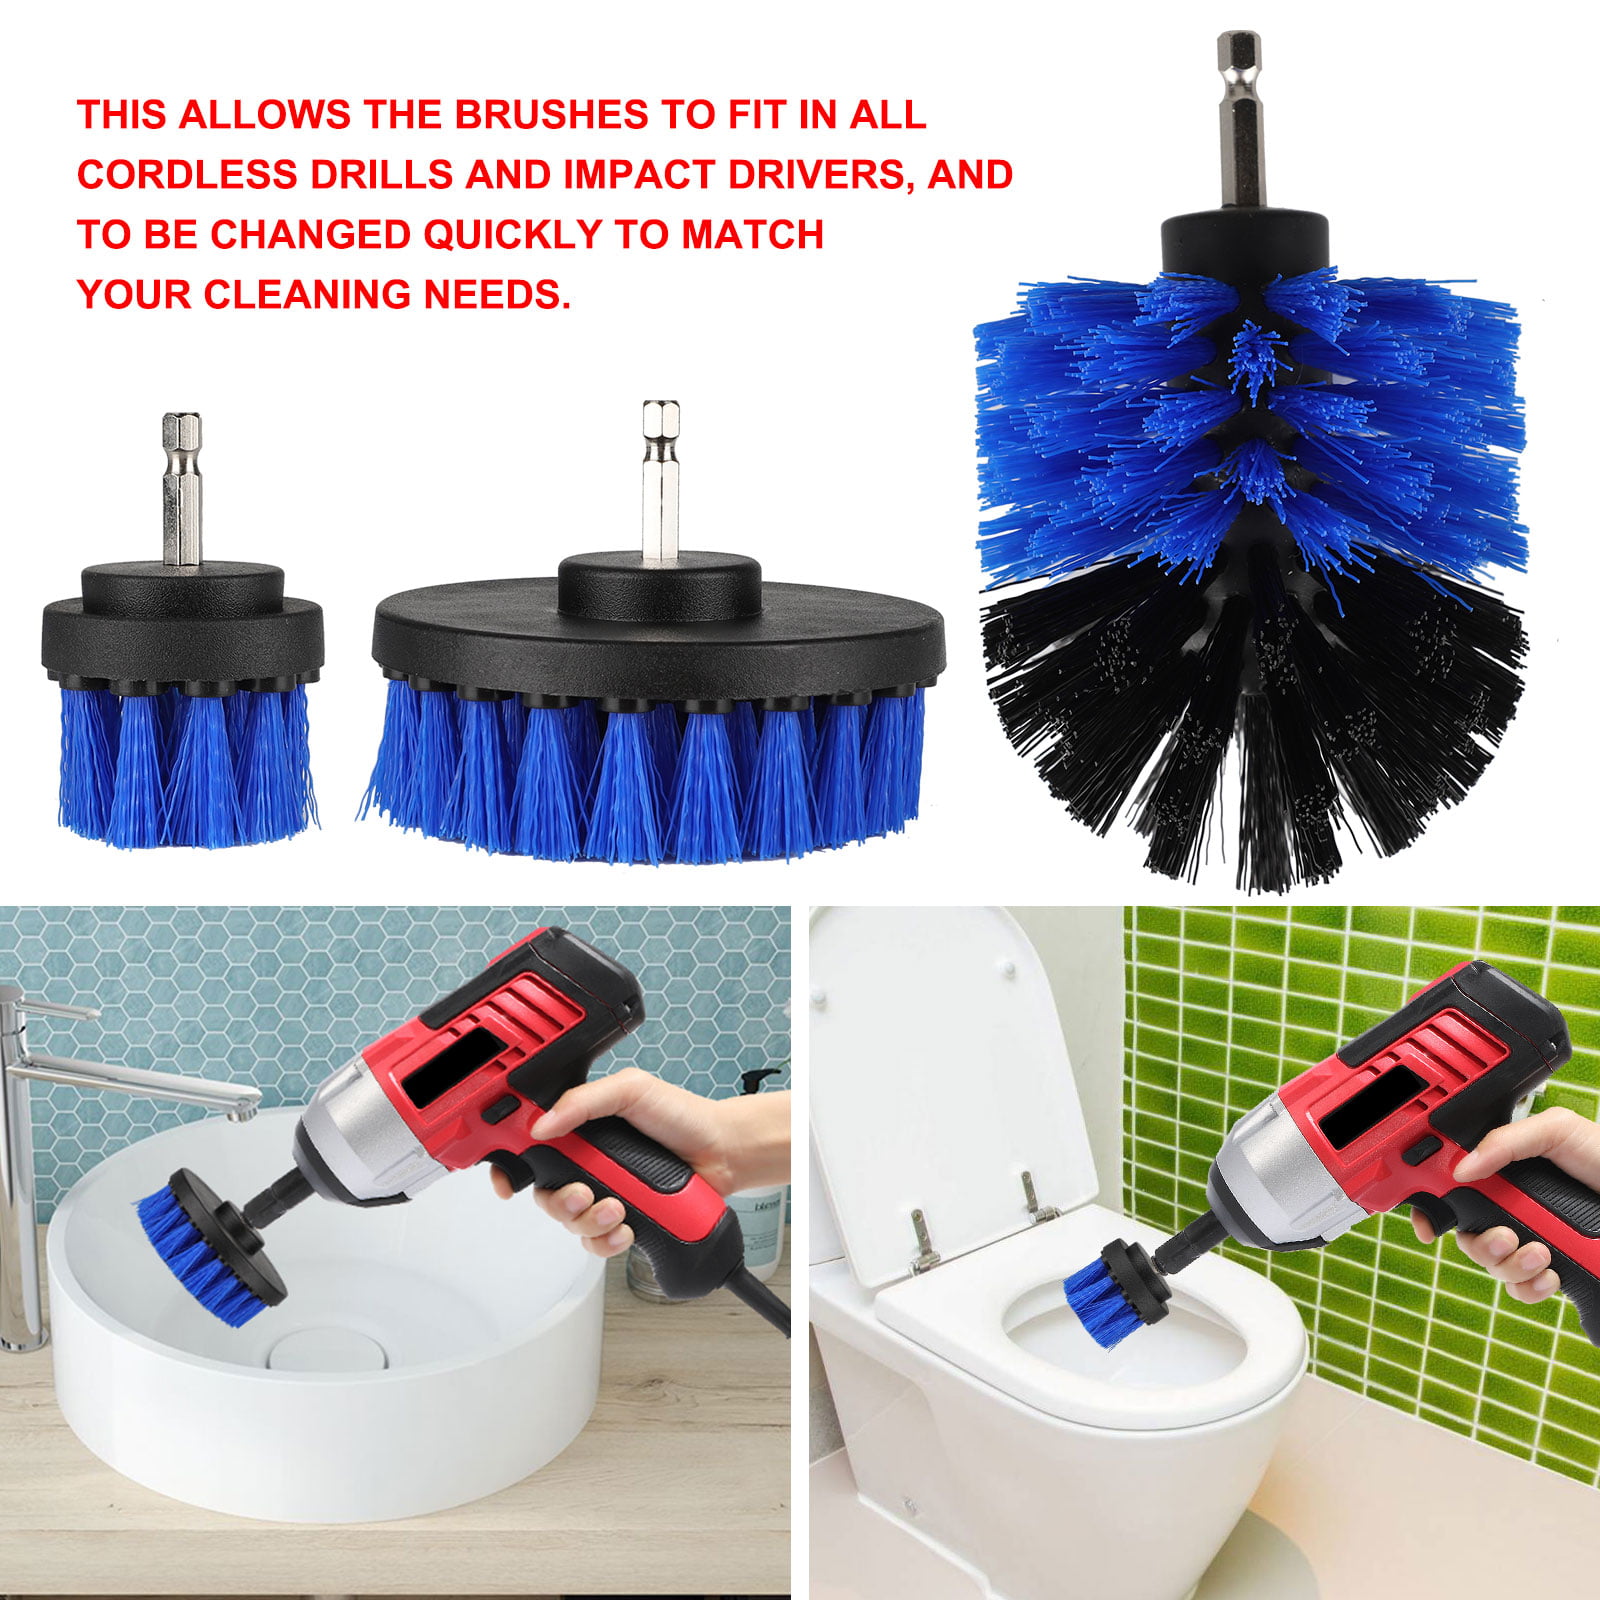 3pcs Drill Brush Set Cleaning Power Scrubber Attachment Car Tile